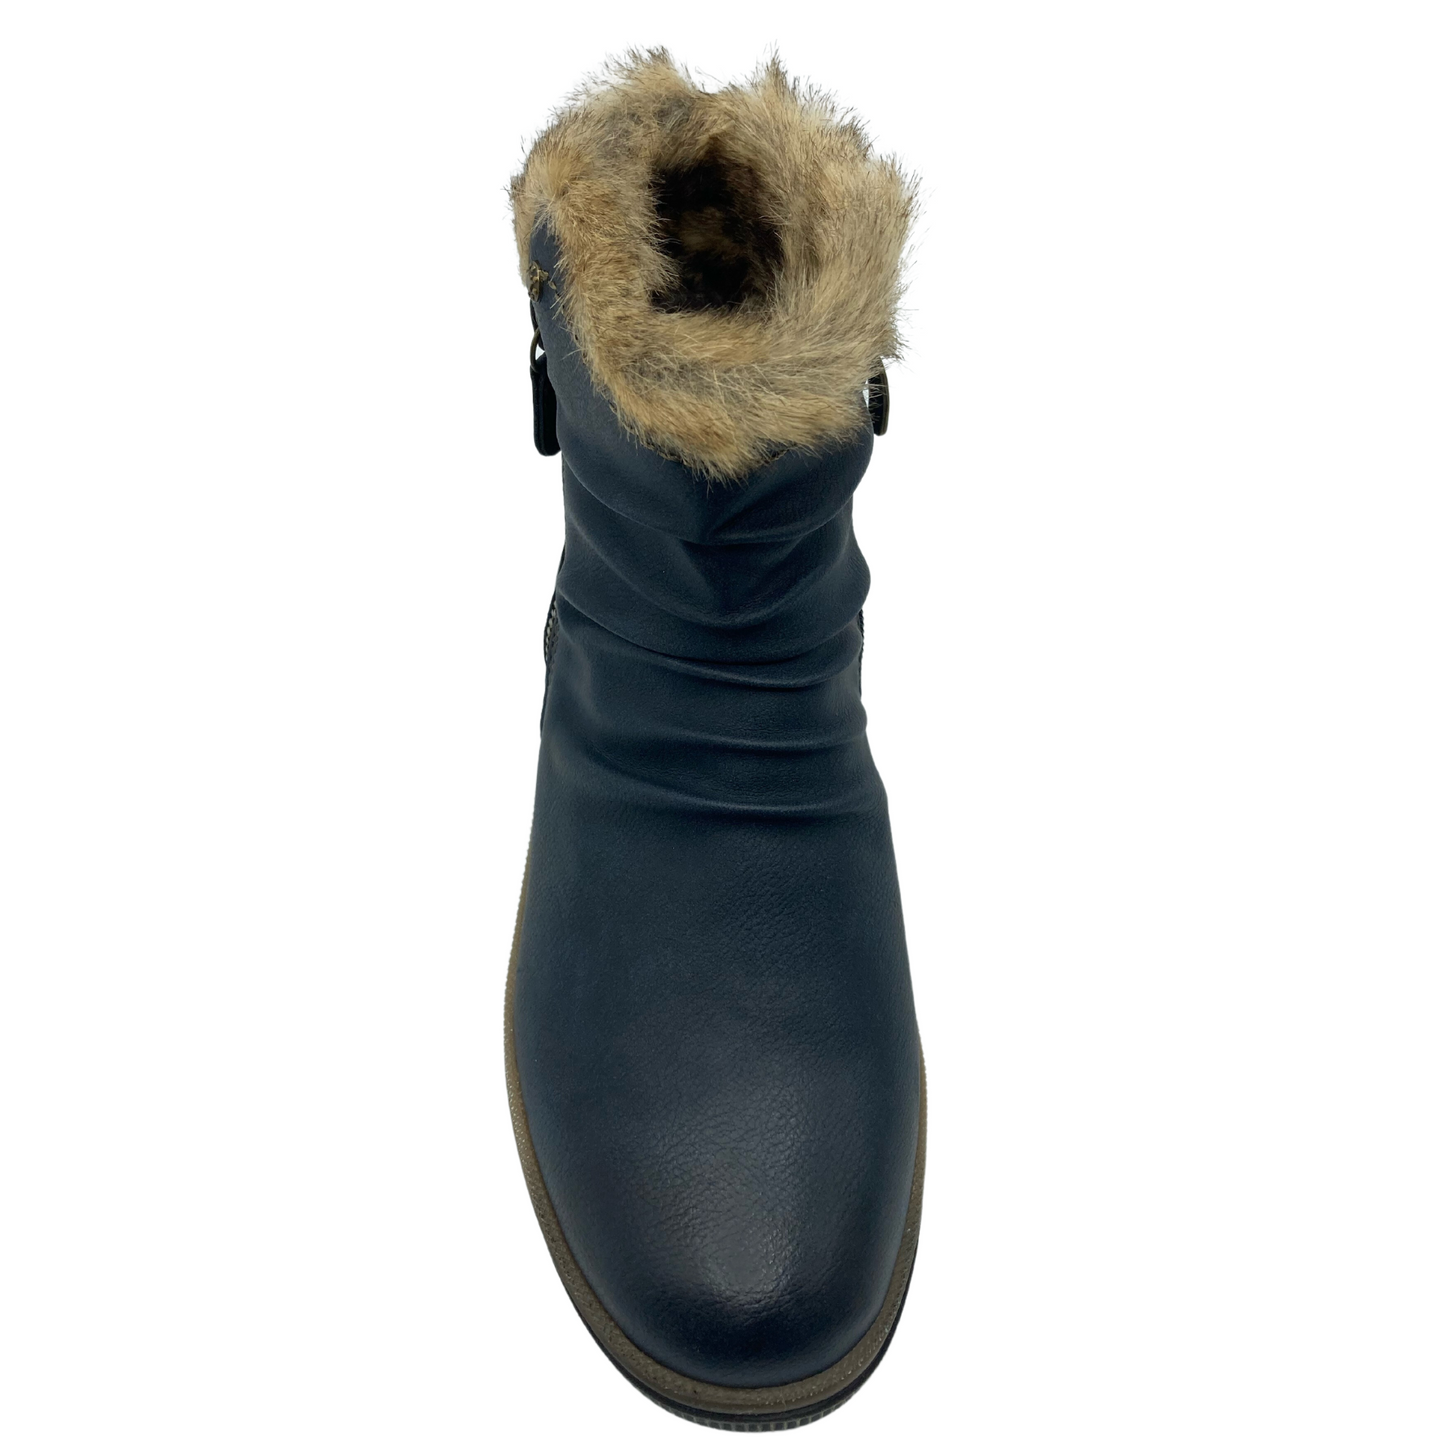 Top view of rounded toe bootie with blue upper and brown faux fur lining